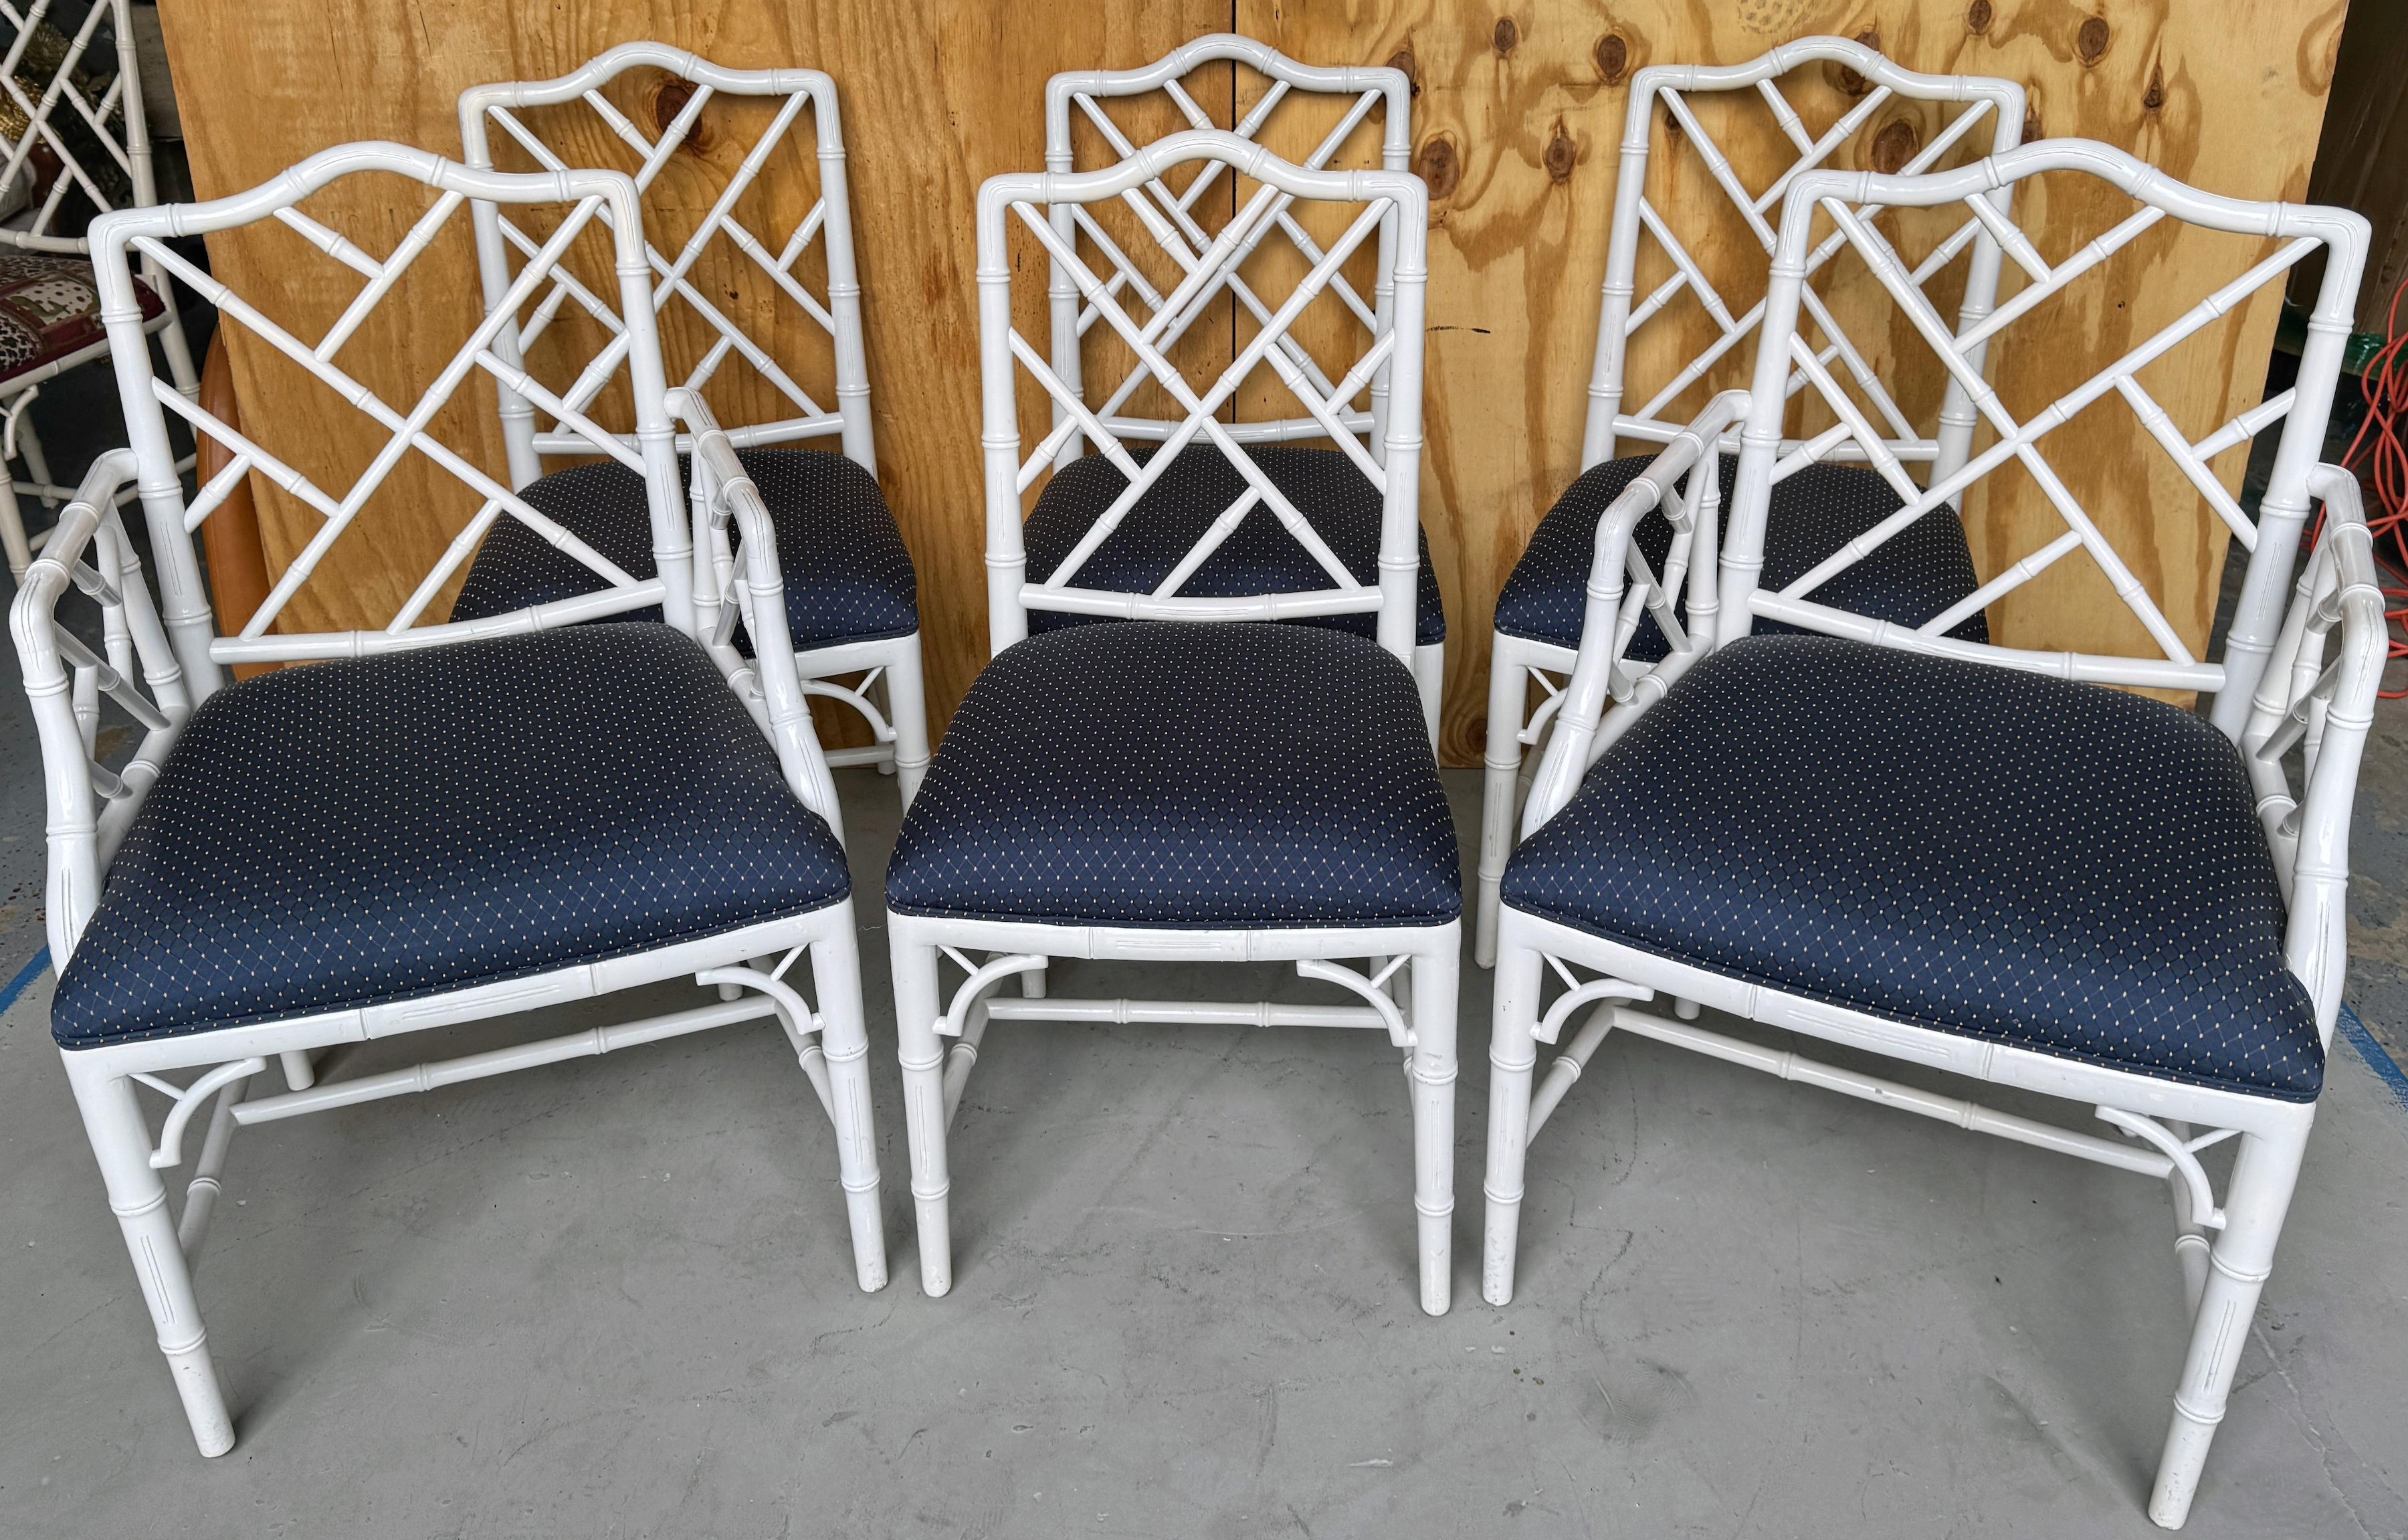 Six Hollywood Regency White Lacquered Faux Bamboo Dinning Room Chairs /Frames 
USA, Circa 1960s
An Exceptional set of six Hollywood Regency White Lacquered Faux Bamboo Dining Room Chairs dating back to the 1960s. Each chair is a masterwork,